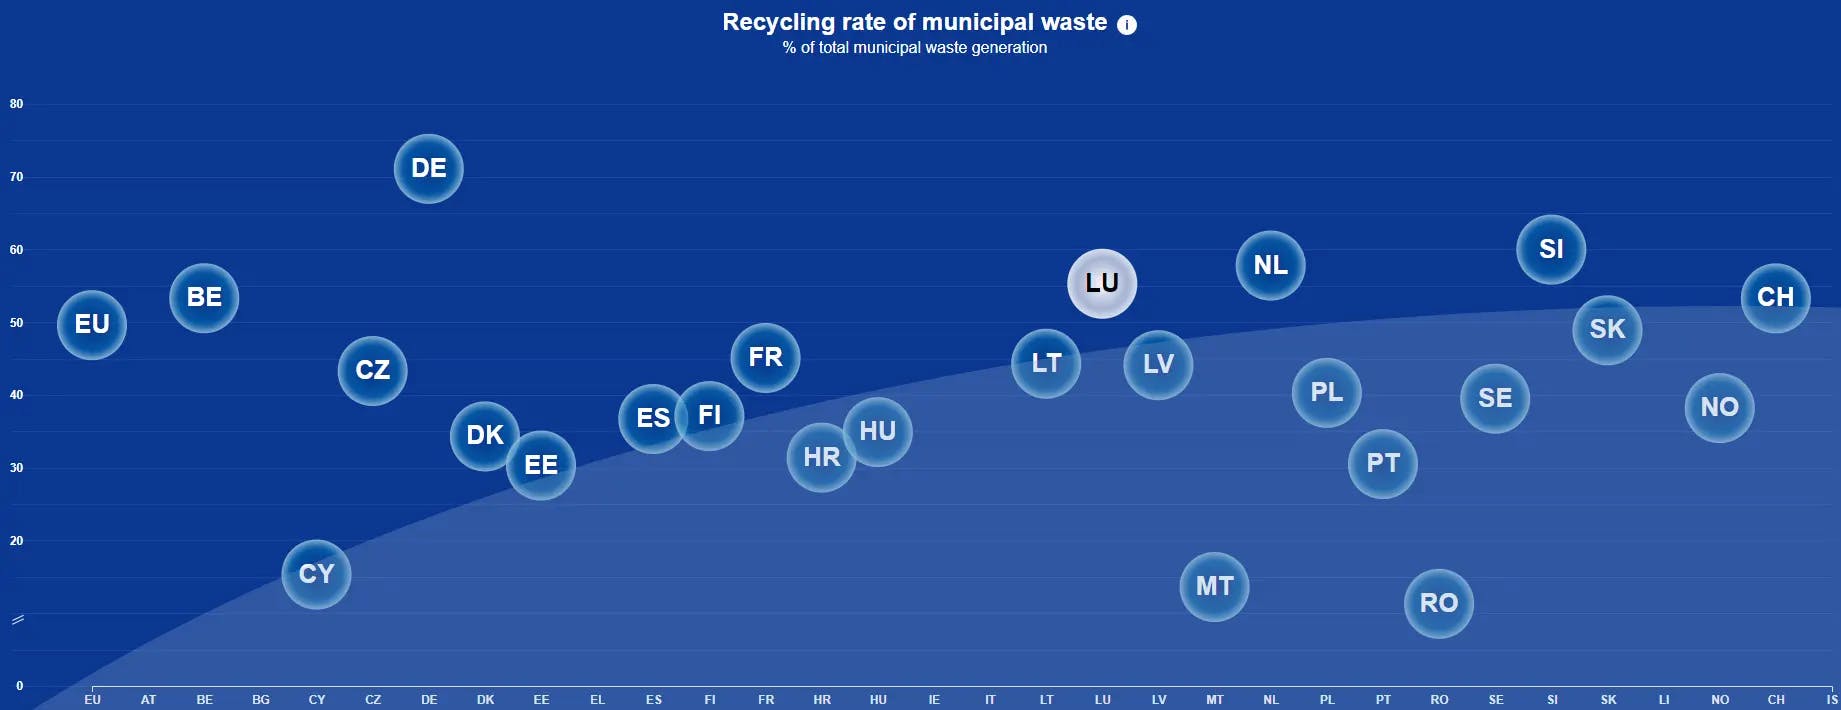 Recycling rate of municipal waste